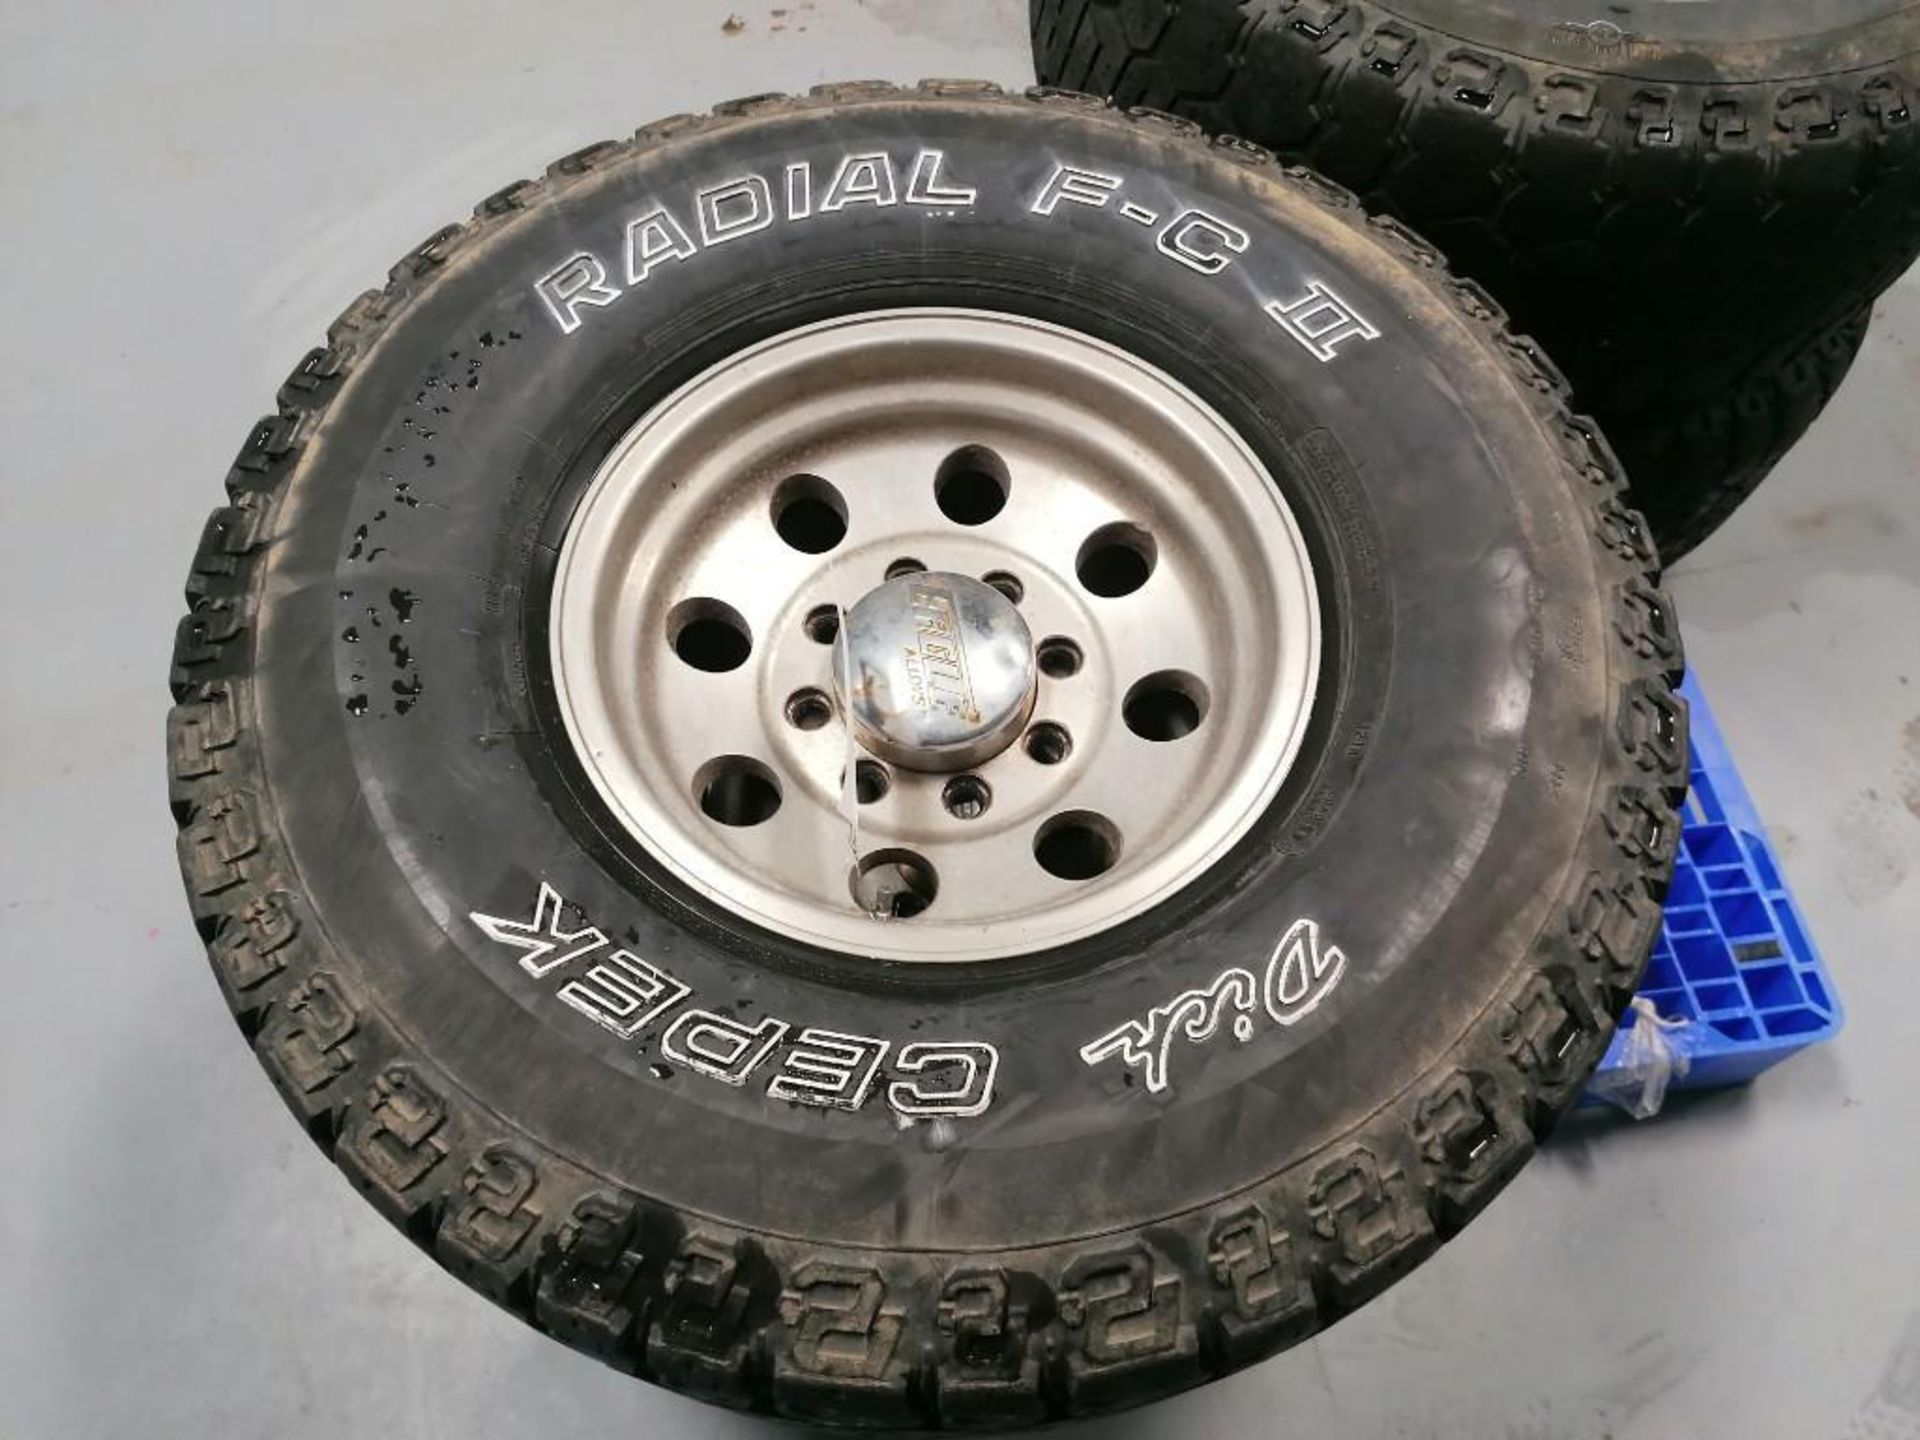 (4) Dick CEPEX Radial F-C II LT315 / 75 R16 Tires with 8 Hole Pattern Rims. Located in Mt. Pleasant, - Image 5 of 10